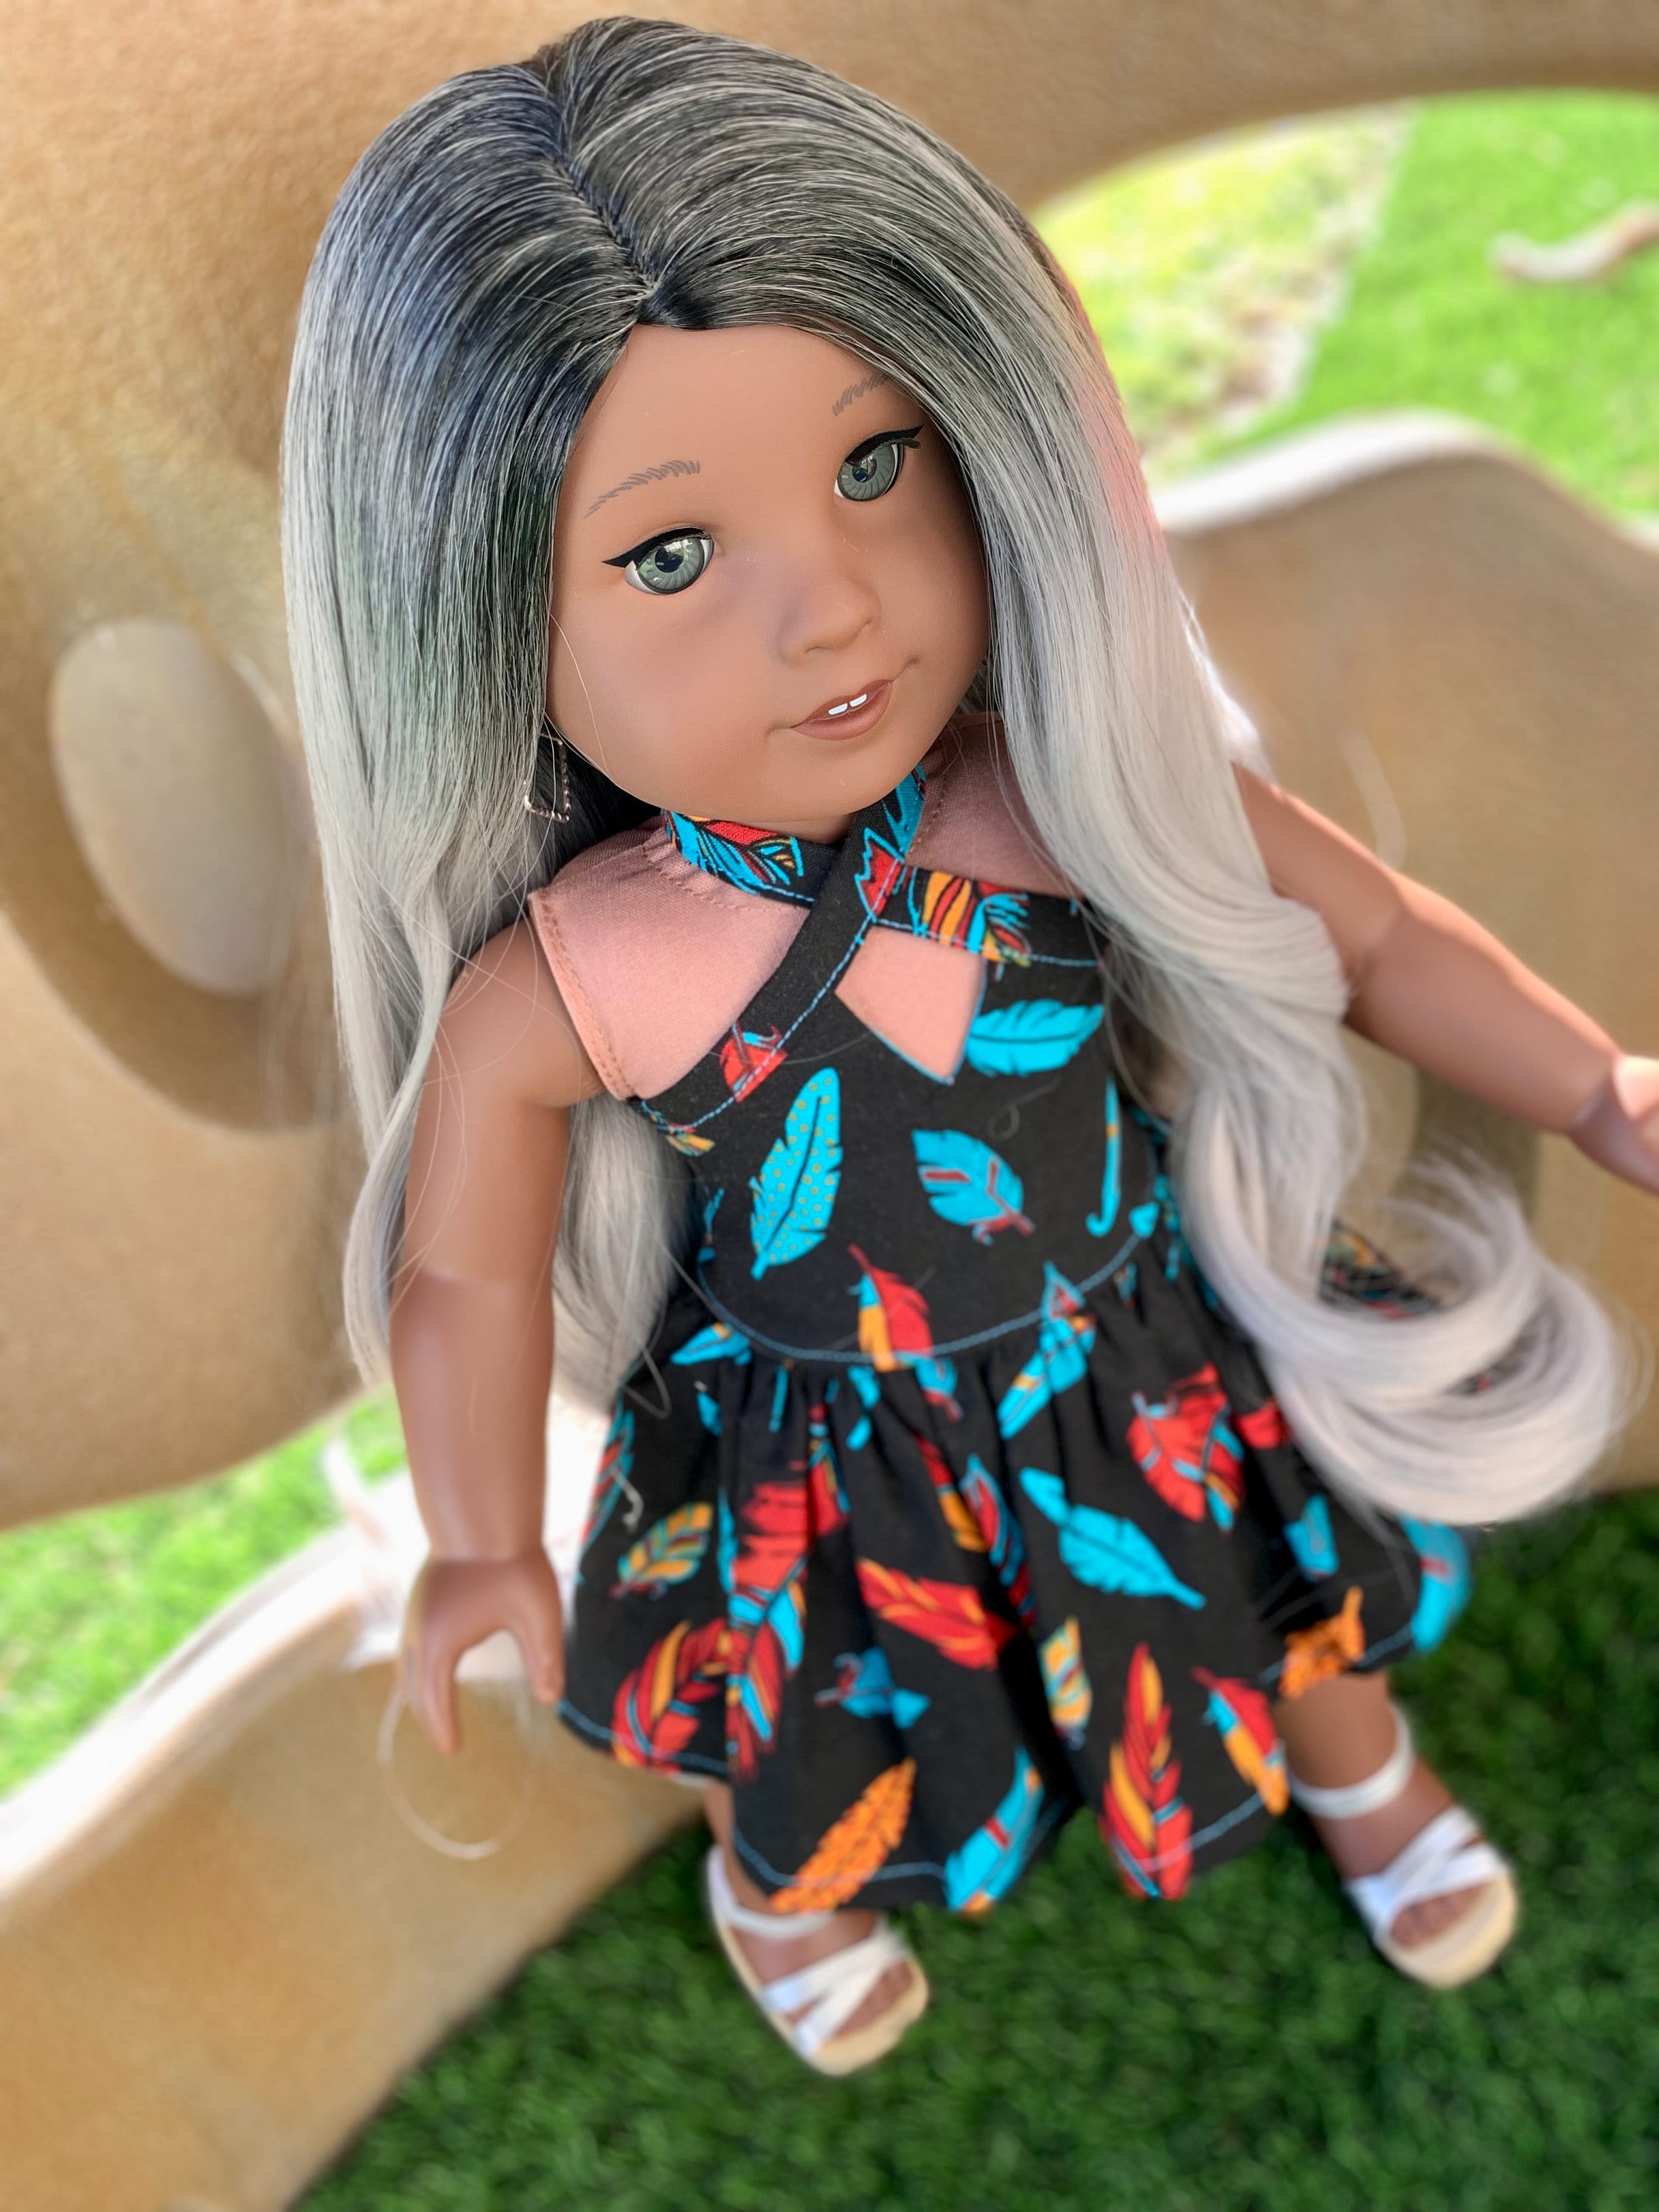 Exquisite Doll Designs Custom Doll Wigs - American Girl Size Wigs 10-11